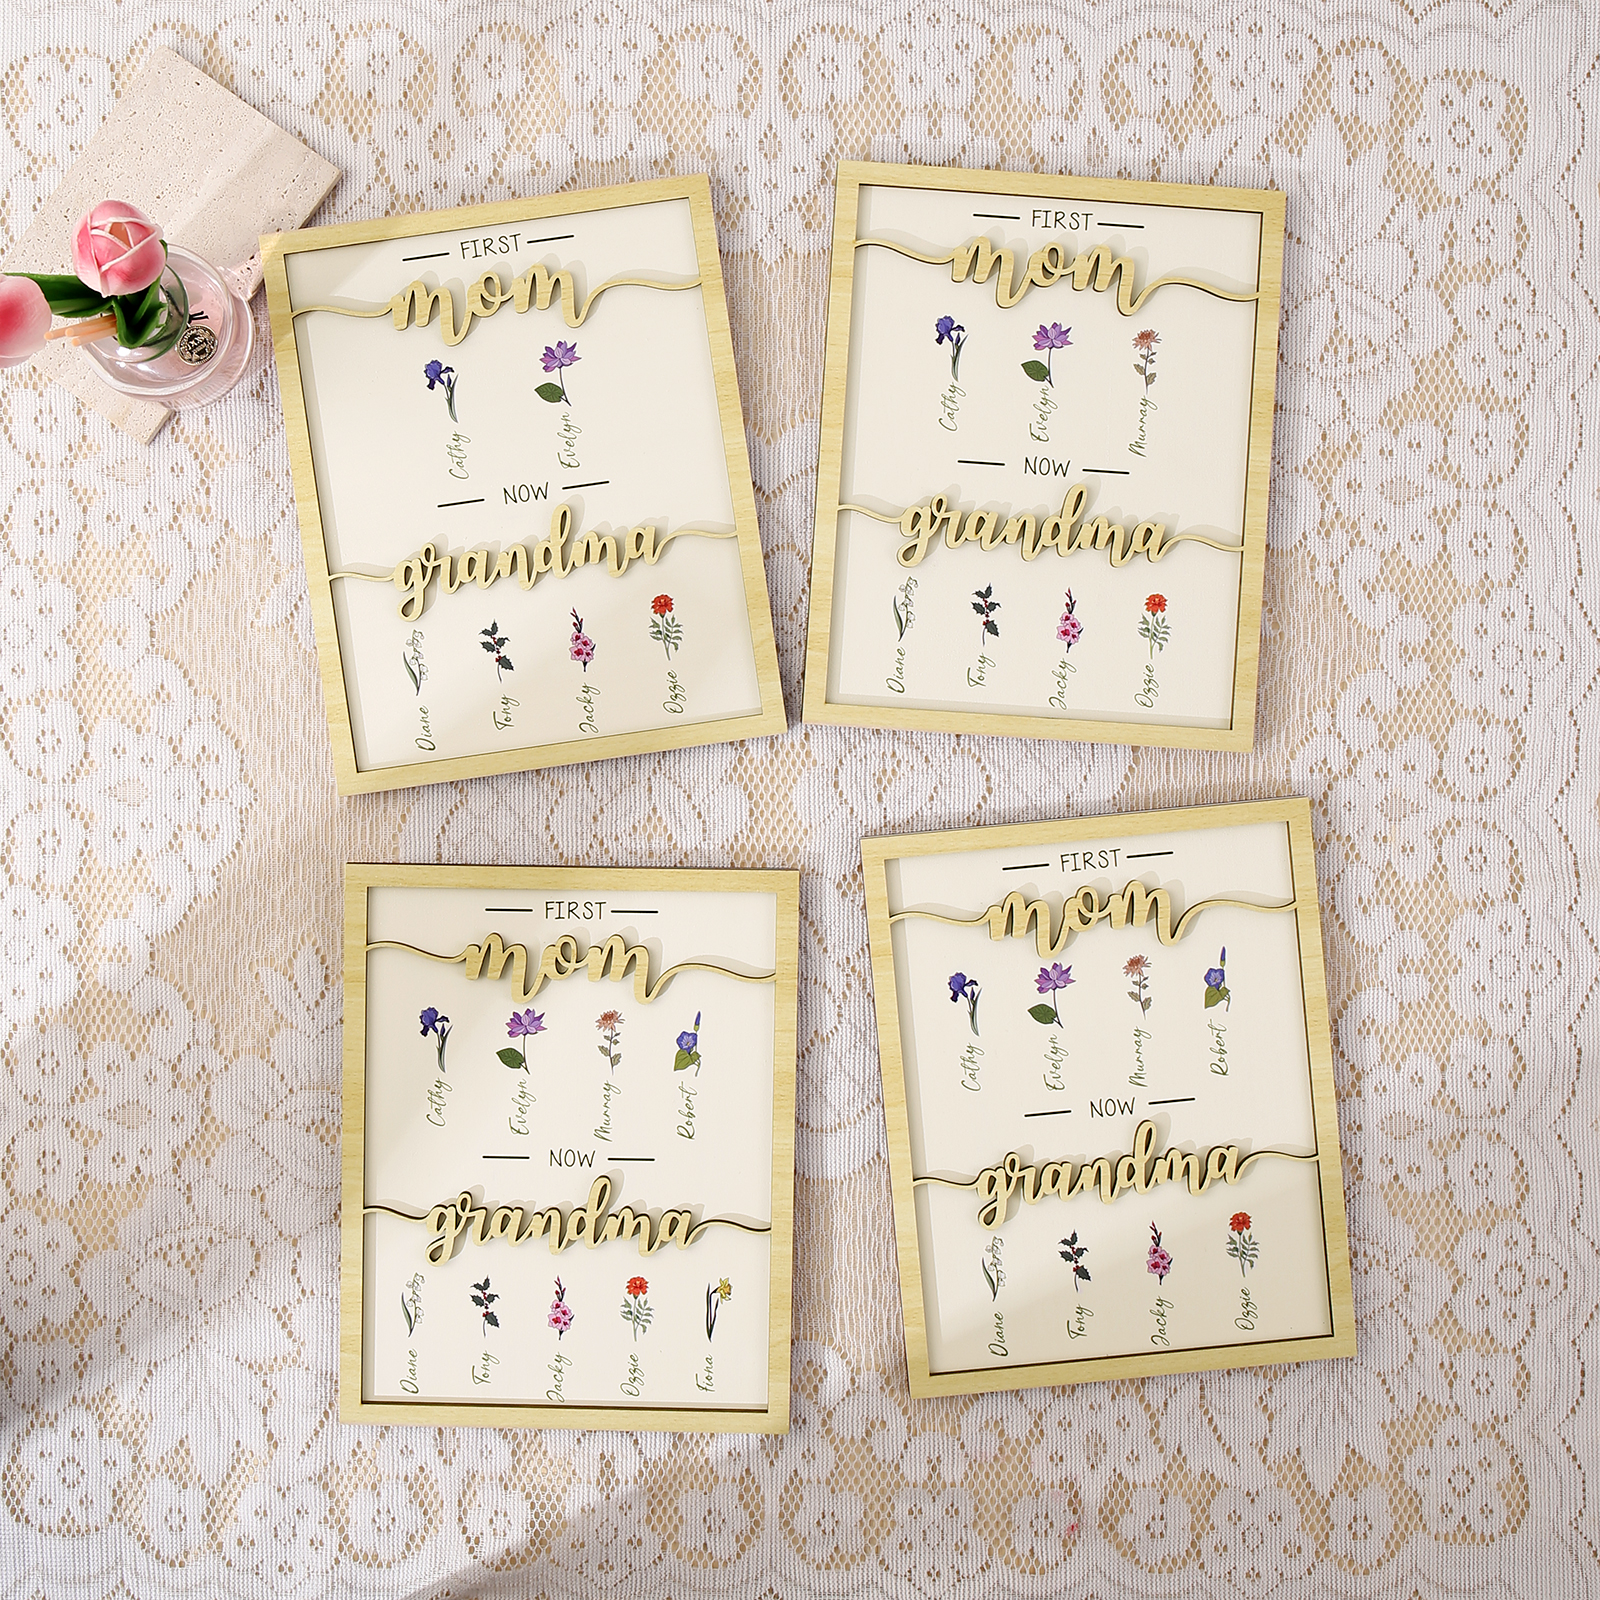 8 Names - Personalized Customized Birth Flower Home Frame Wooden Decoration for Mom/Grandma